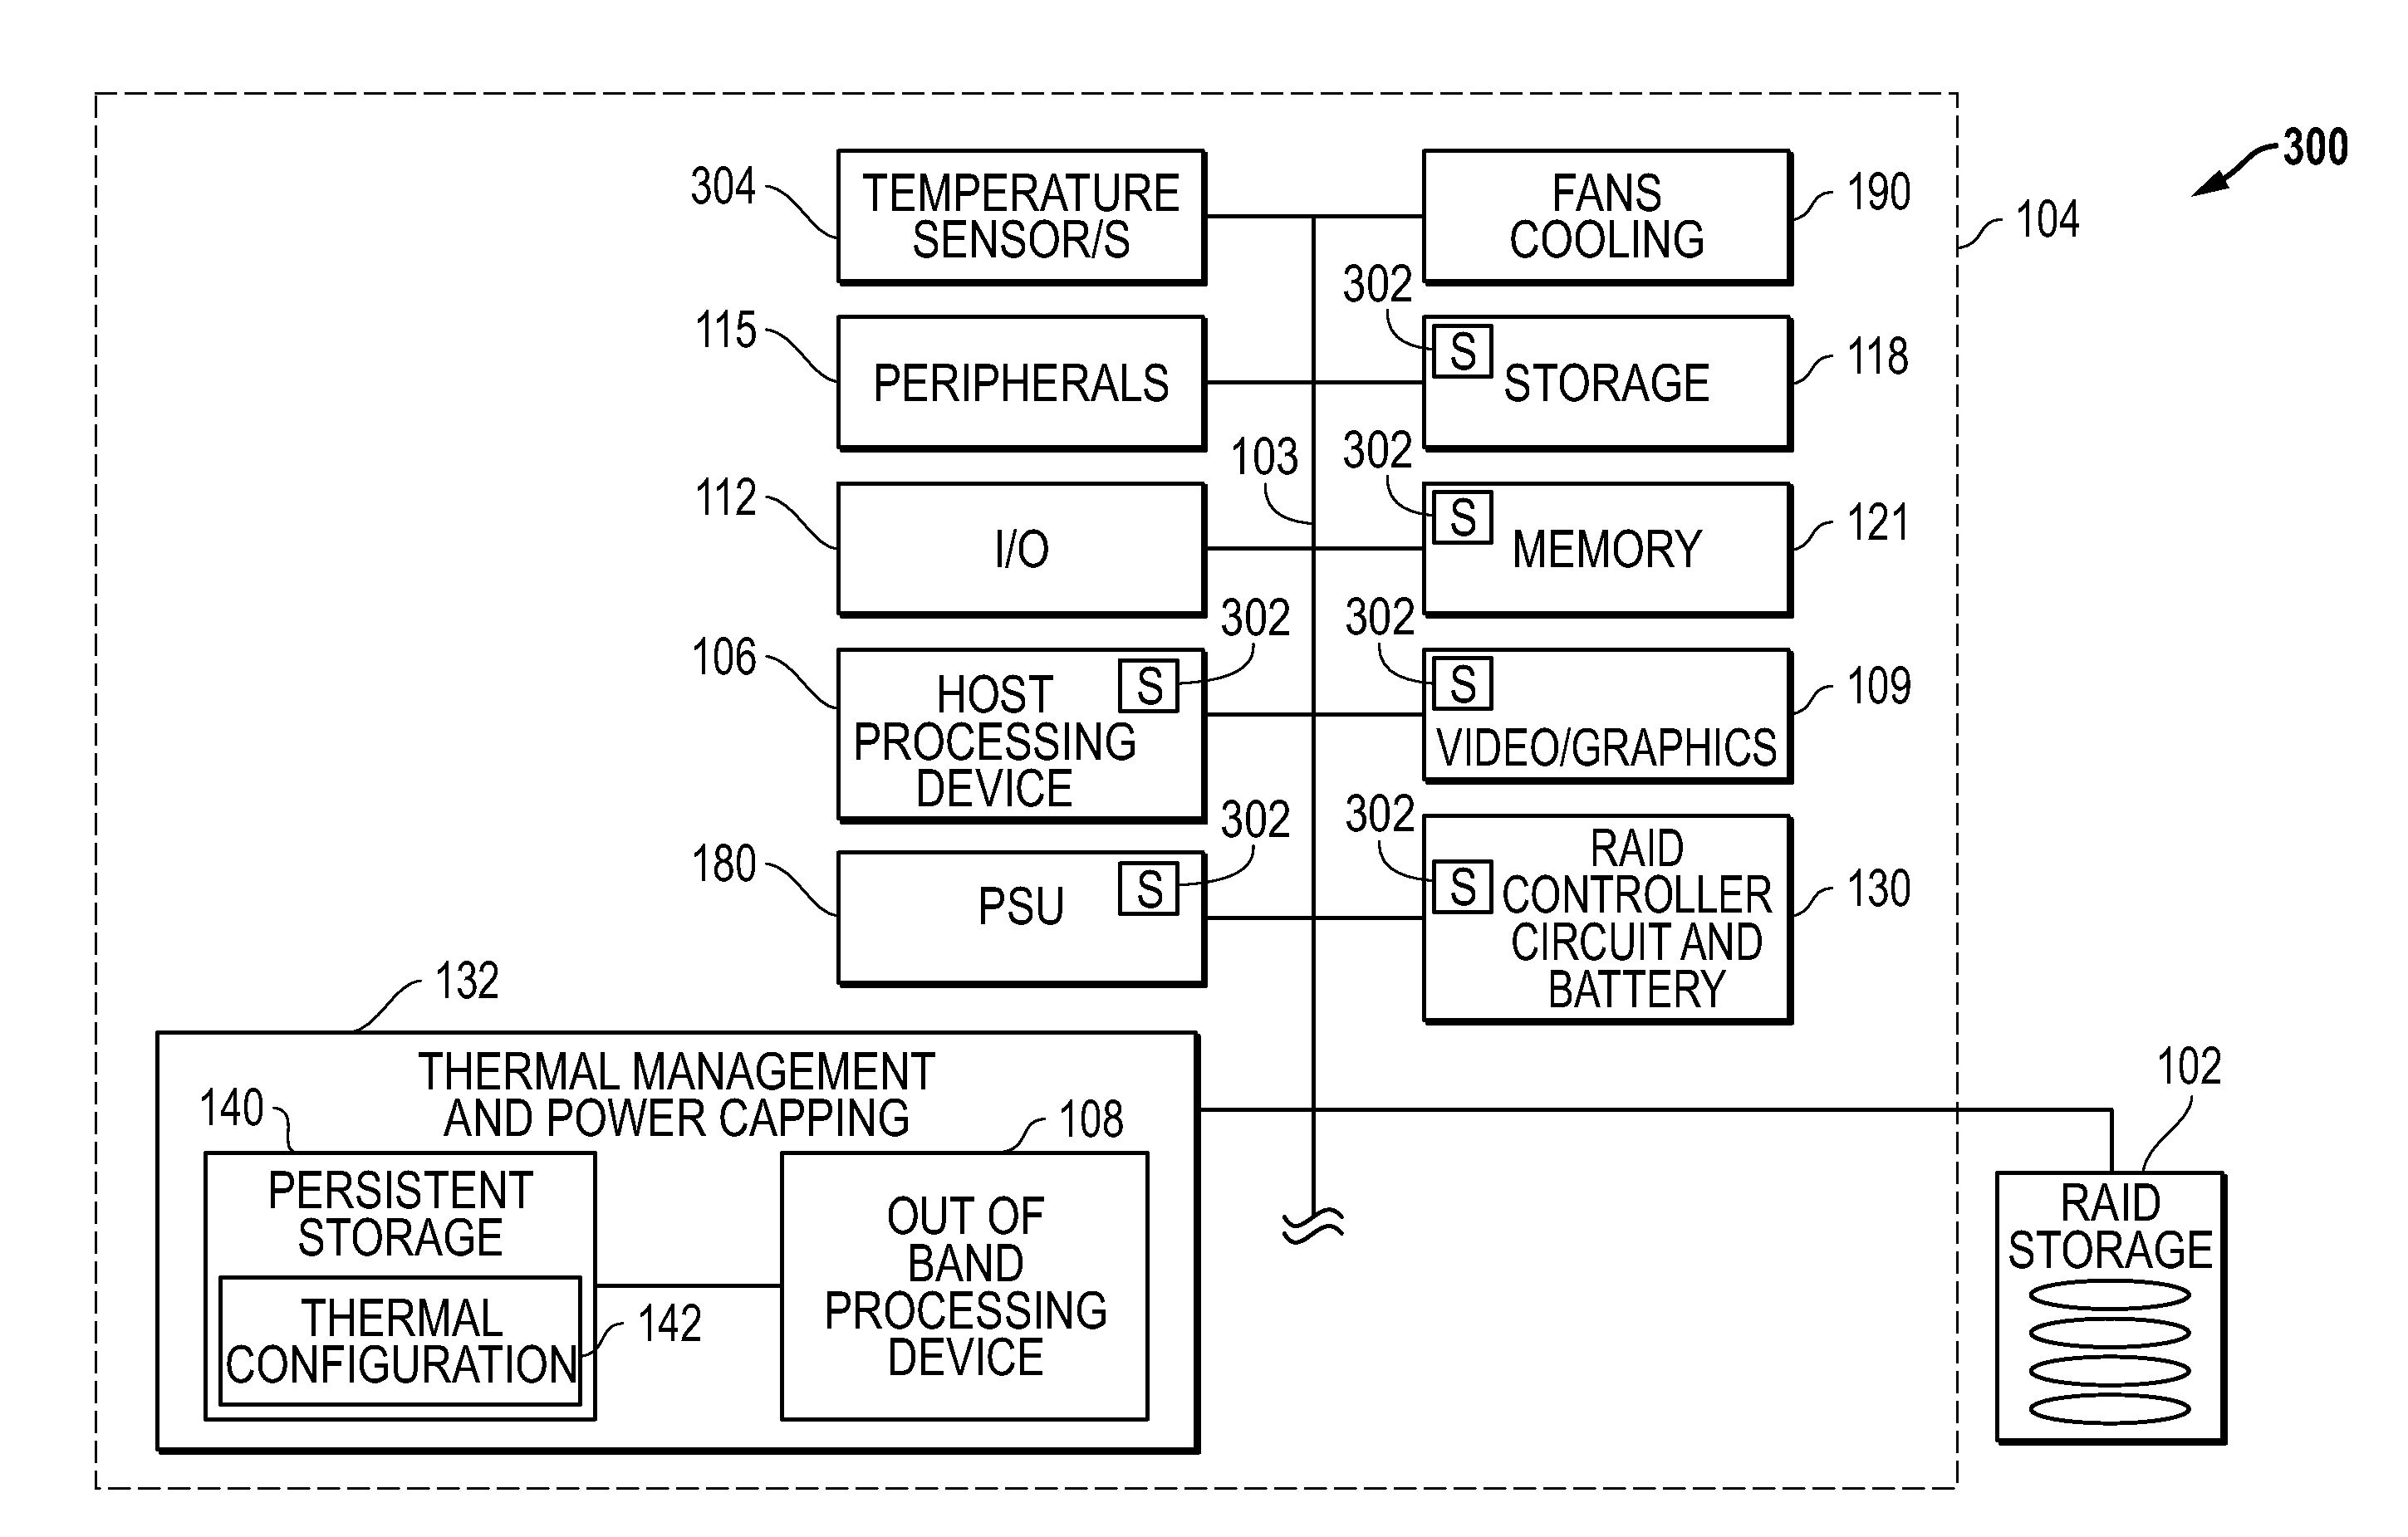 Thermal control systems and methods for information handling systems